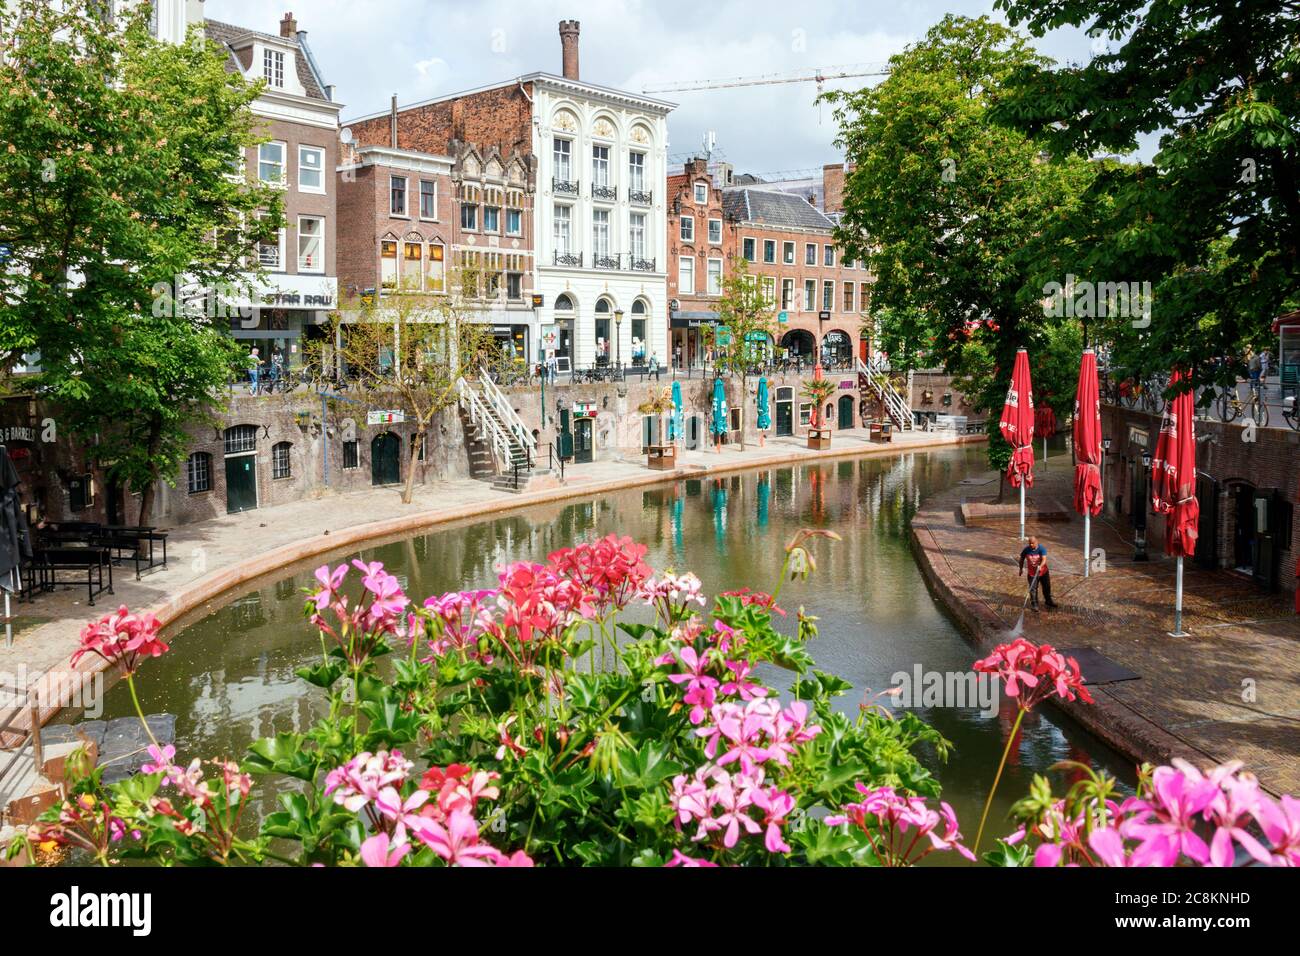 Utrecht. The Oudegracht (Old Canal) with flowers, medieval wharfs and the Fresenburch, one of the monumental houses. The Netherlands. Stock Photo